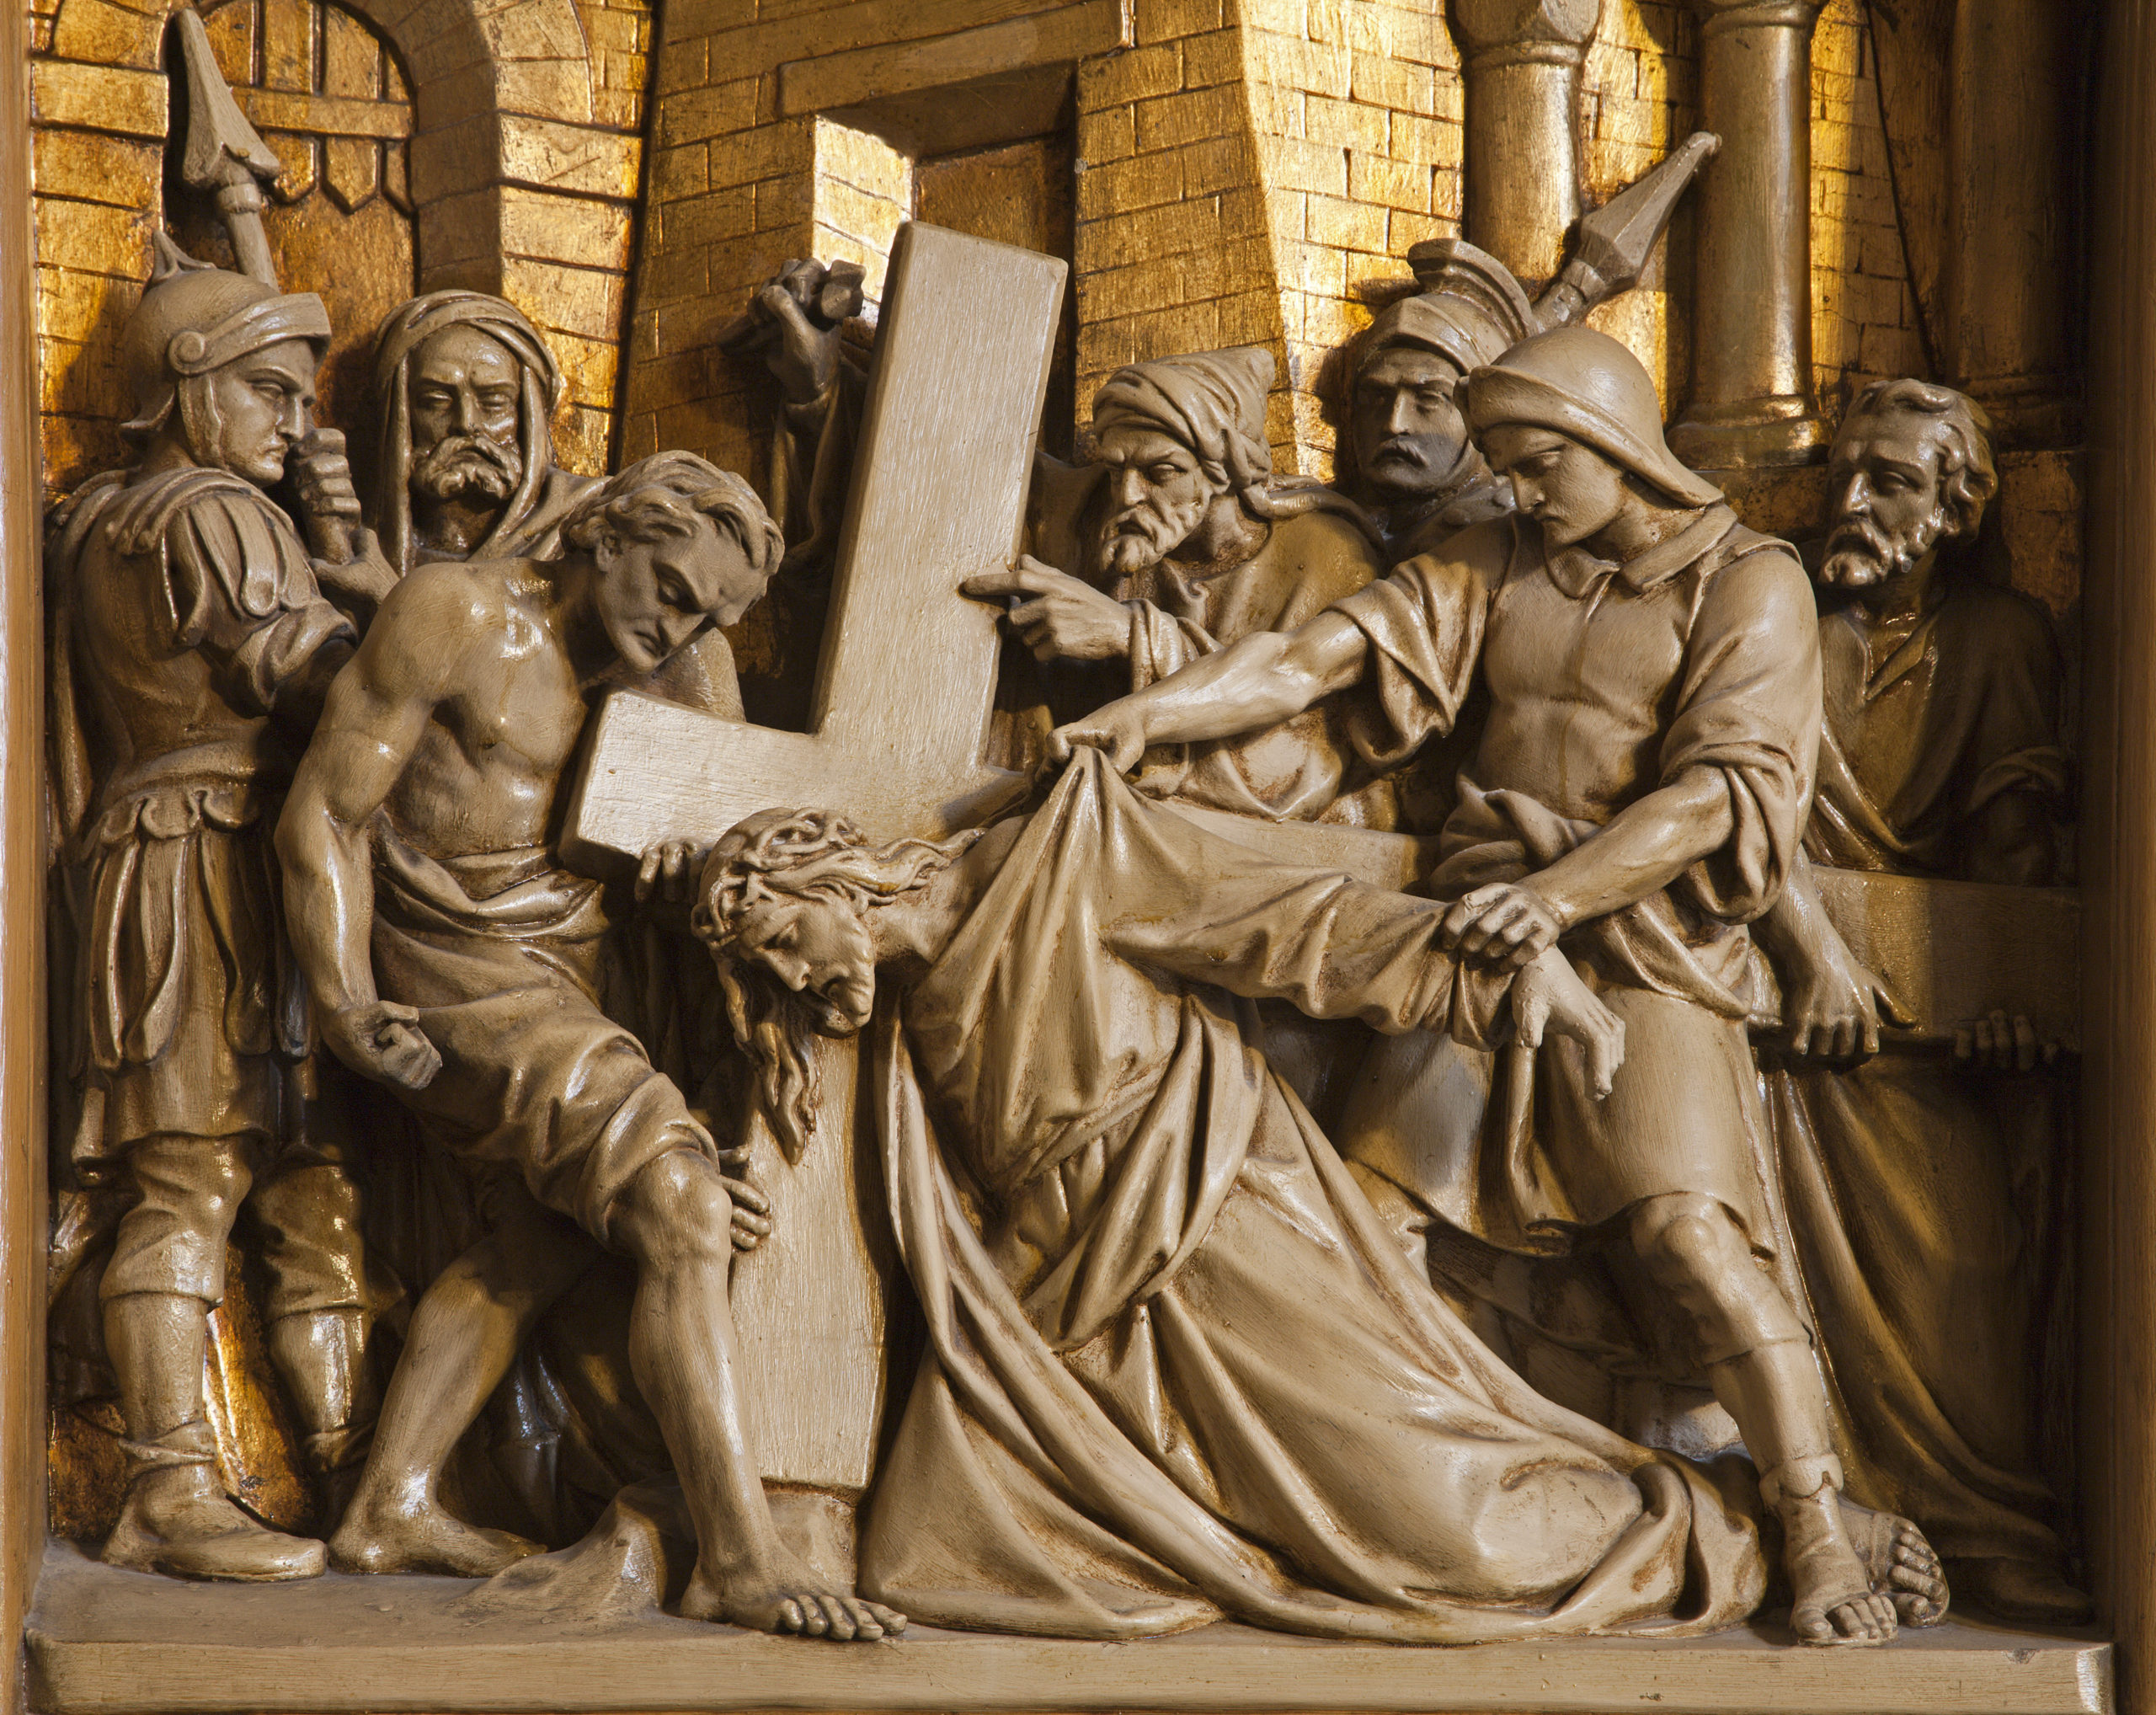 The Stations of the Cross